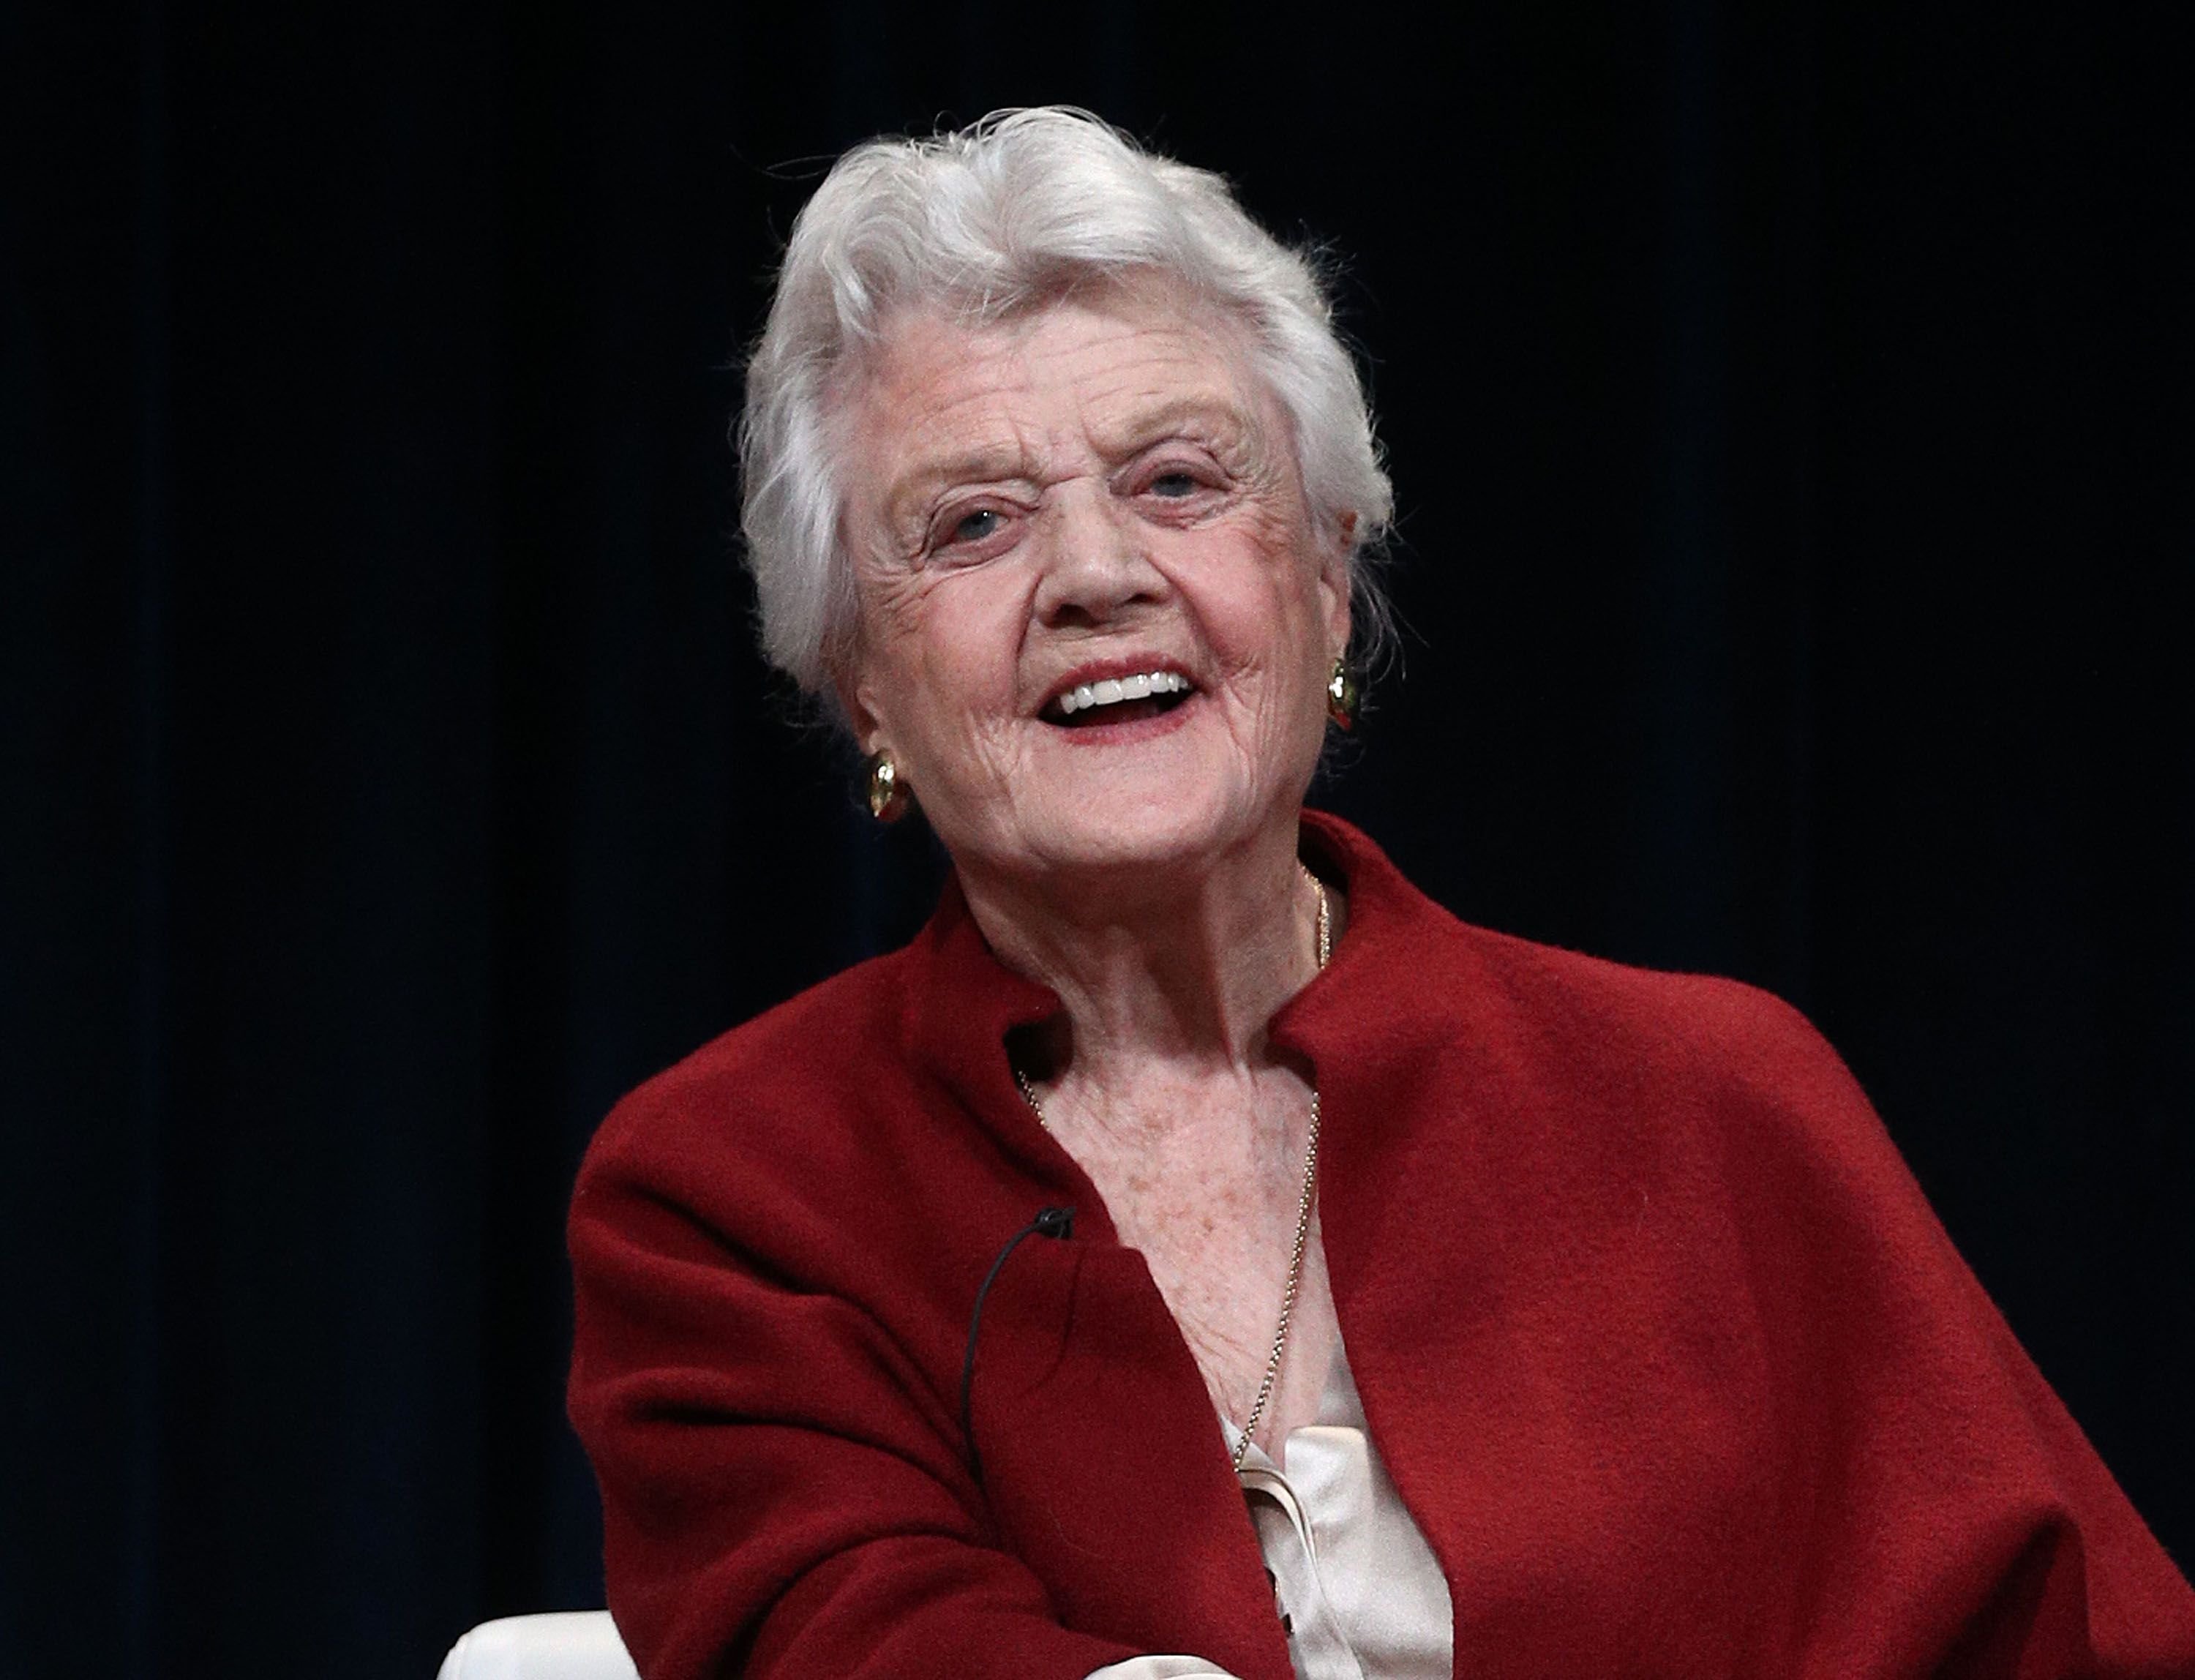 Actress Angela Lansbury speaks at the PBS segment of the 2018 Winter Television Critics Association Press Tour at The Langham Huntington, Pasadena on January 16, 2018 | Photo: Getty Images